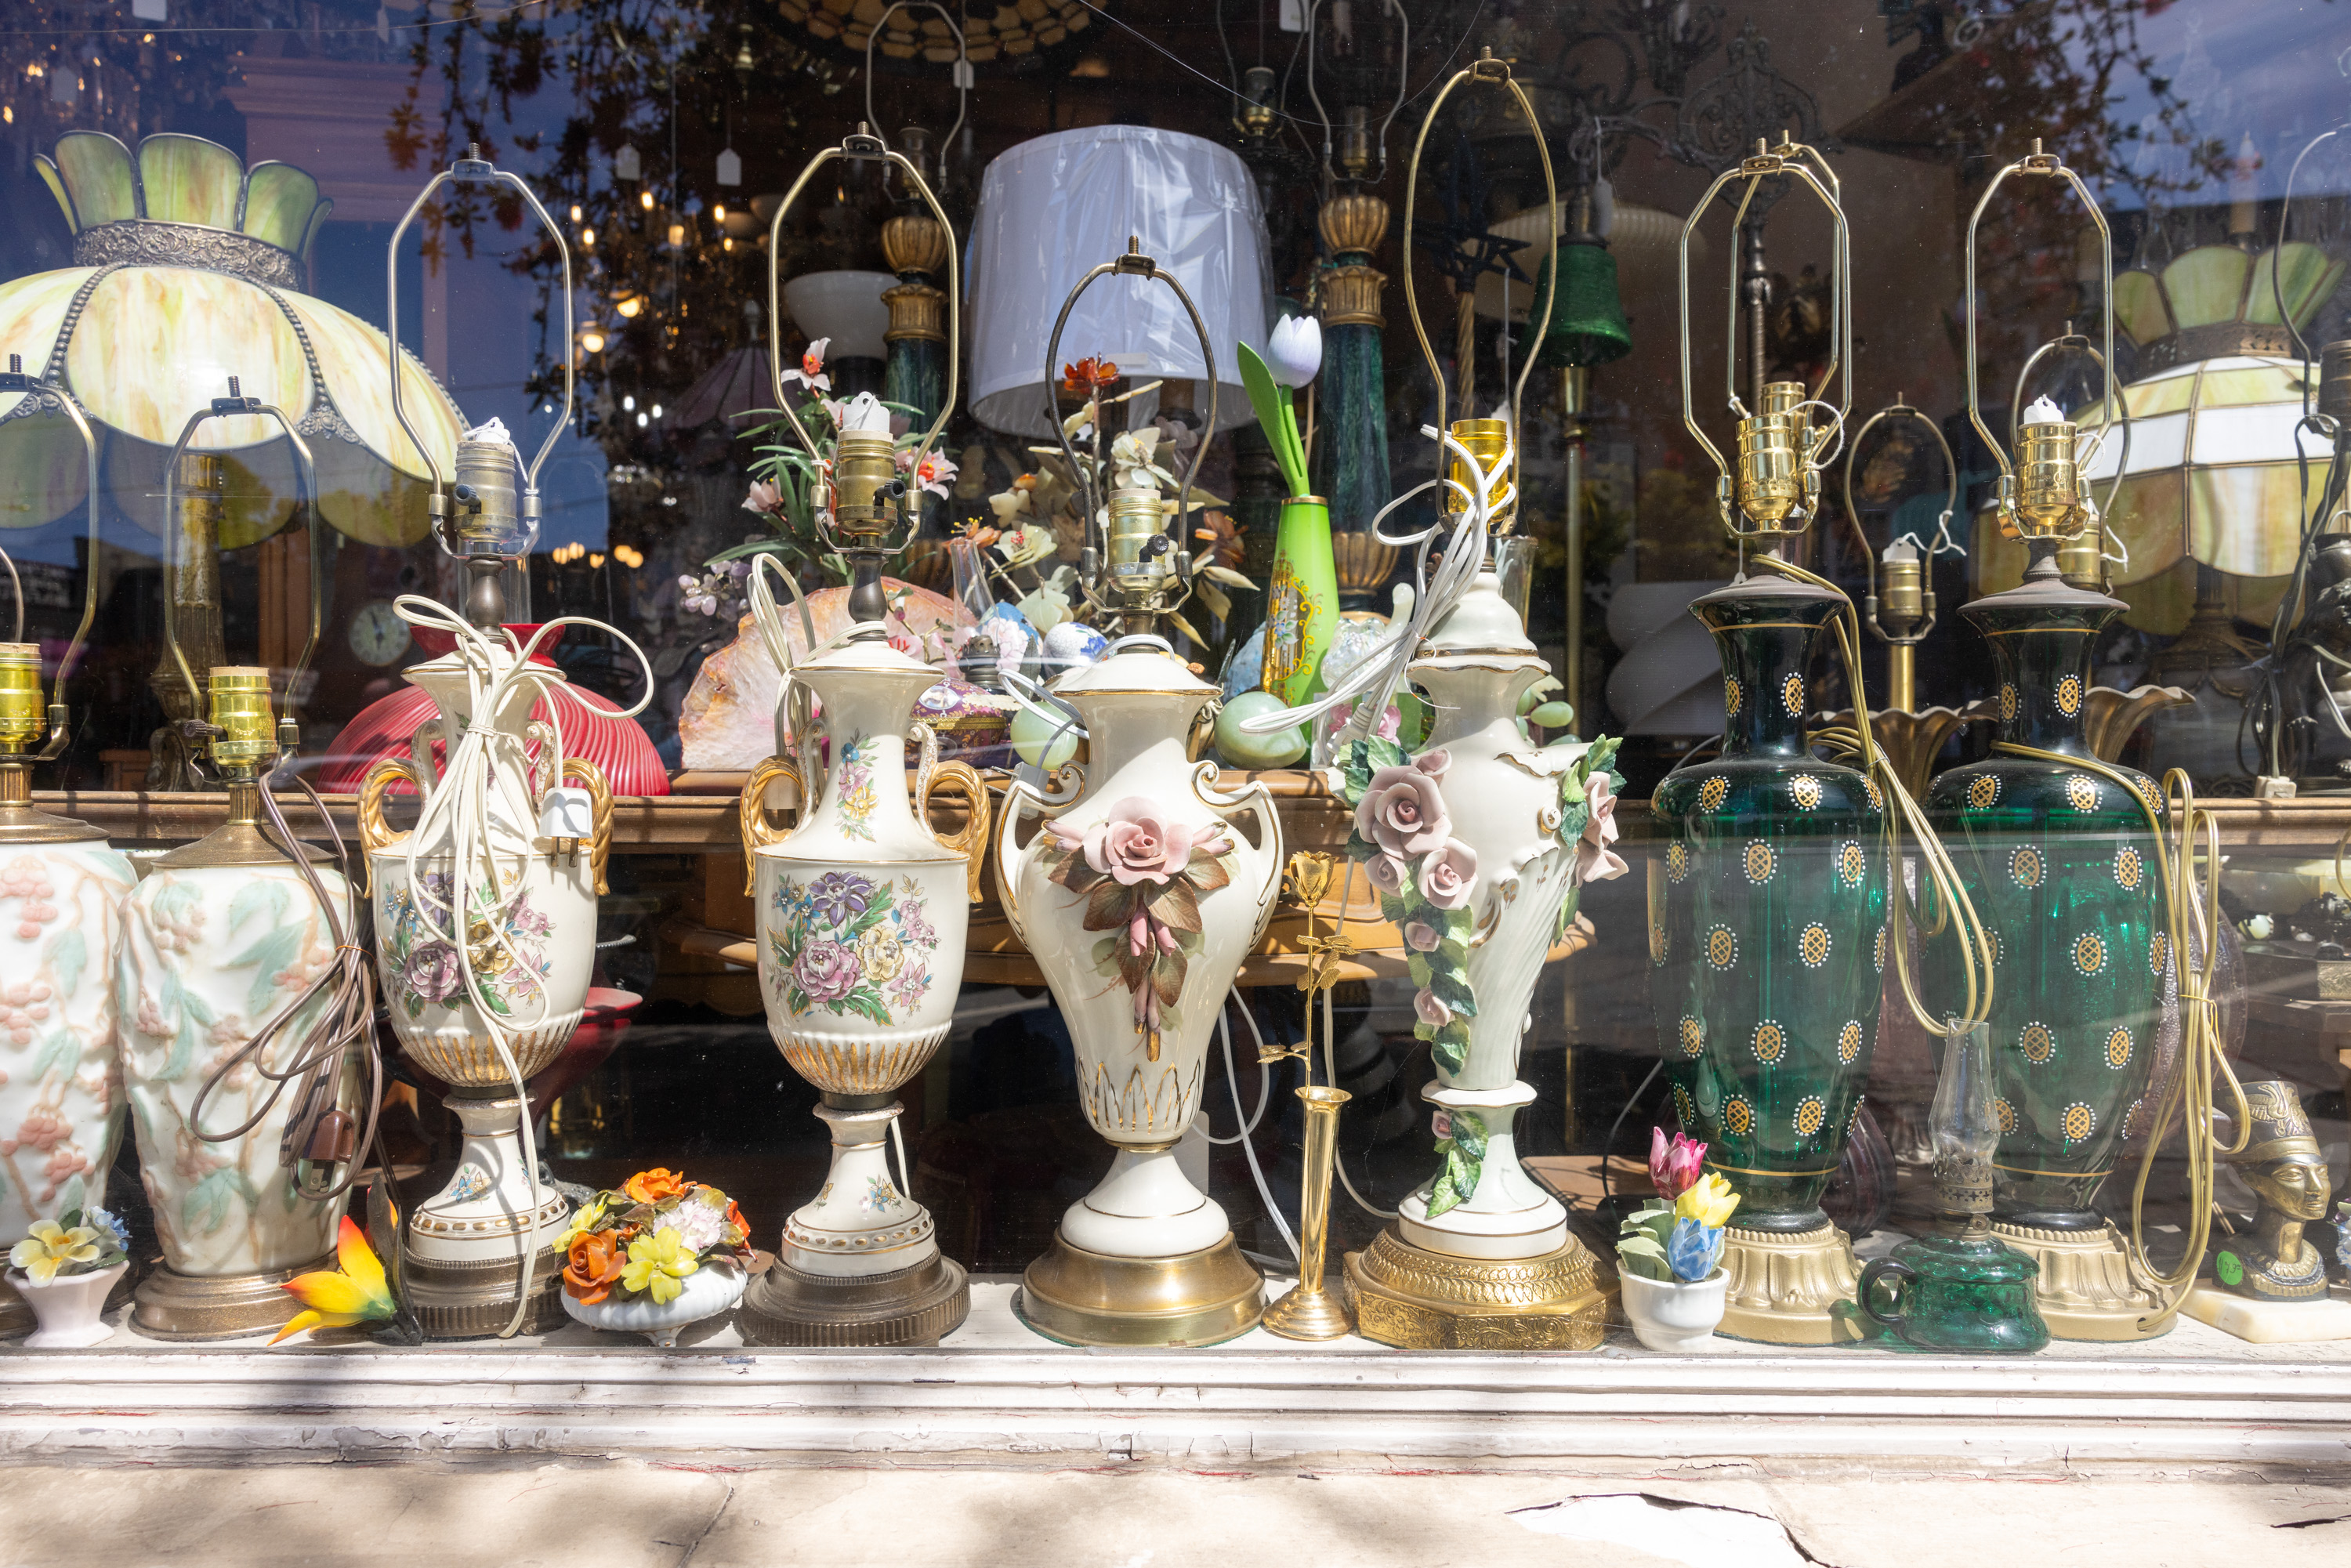 The image shows a shop window displaying an array of ornate, vintage-style table lamps and decorative vases, featuring intricate floral designs and vibrant colors.